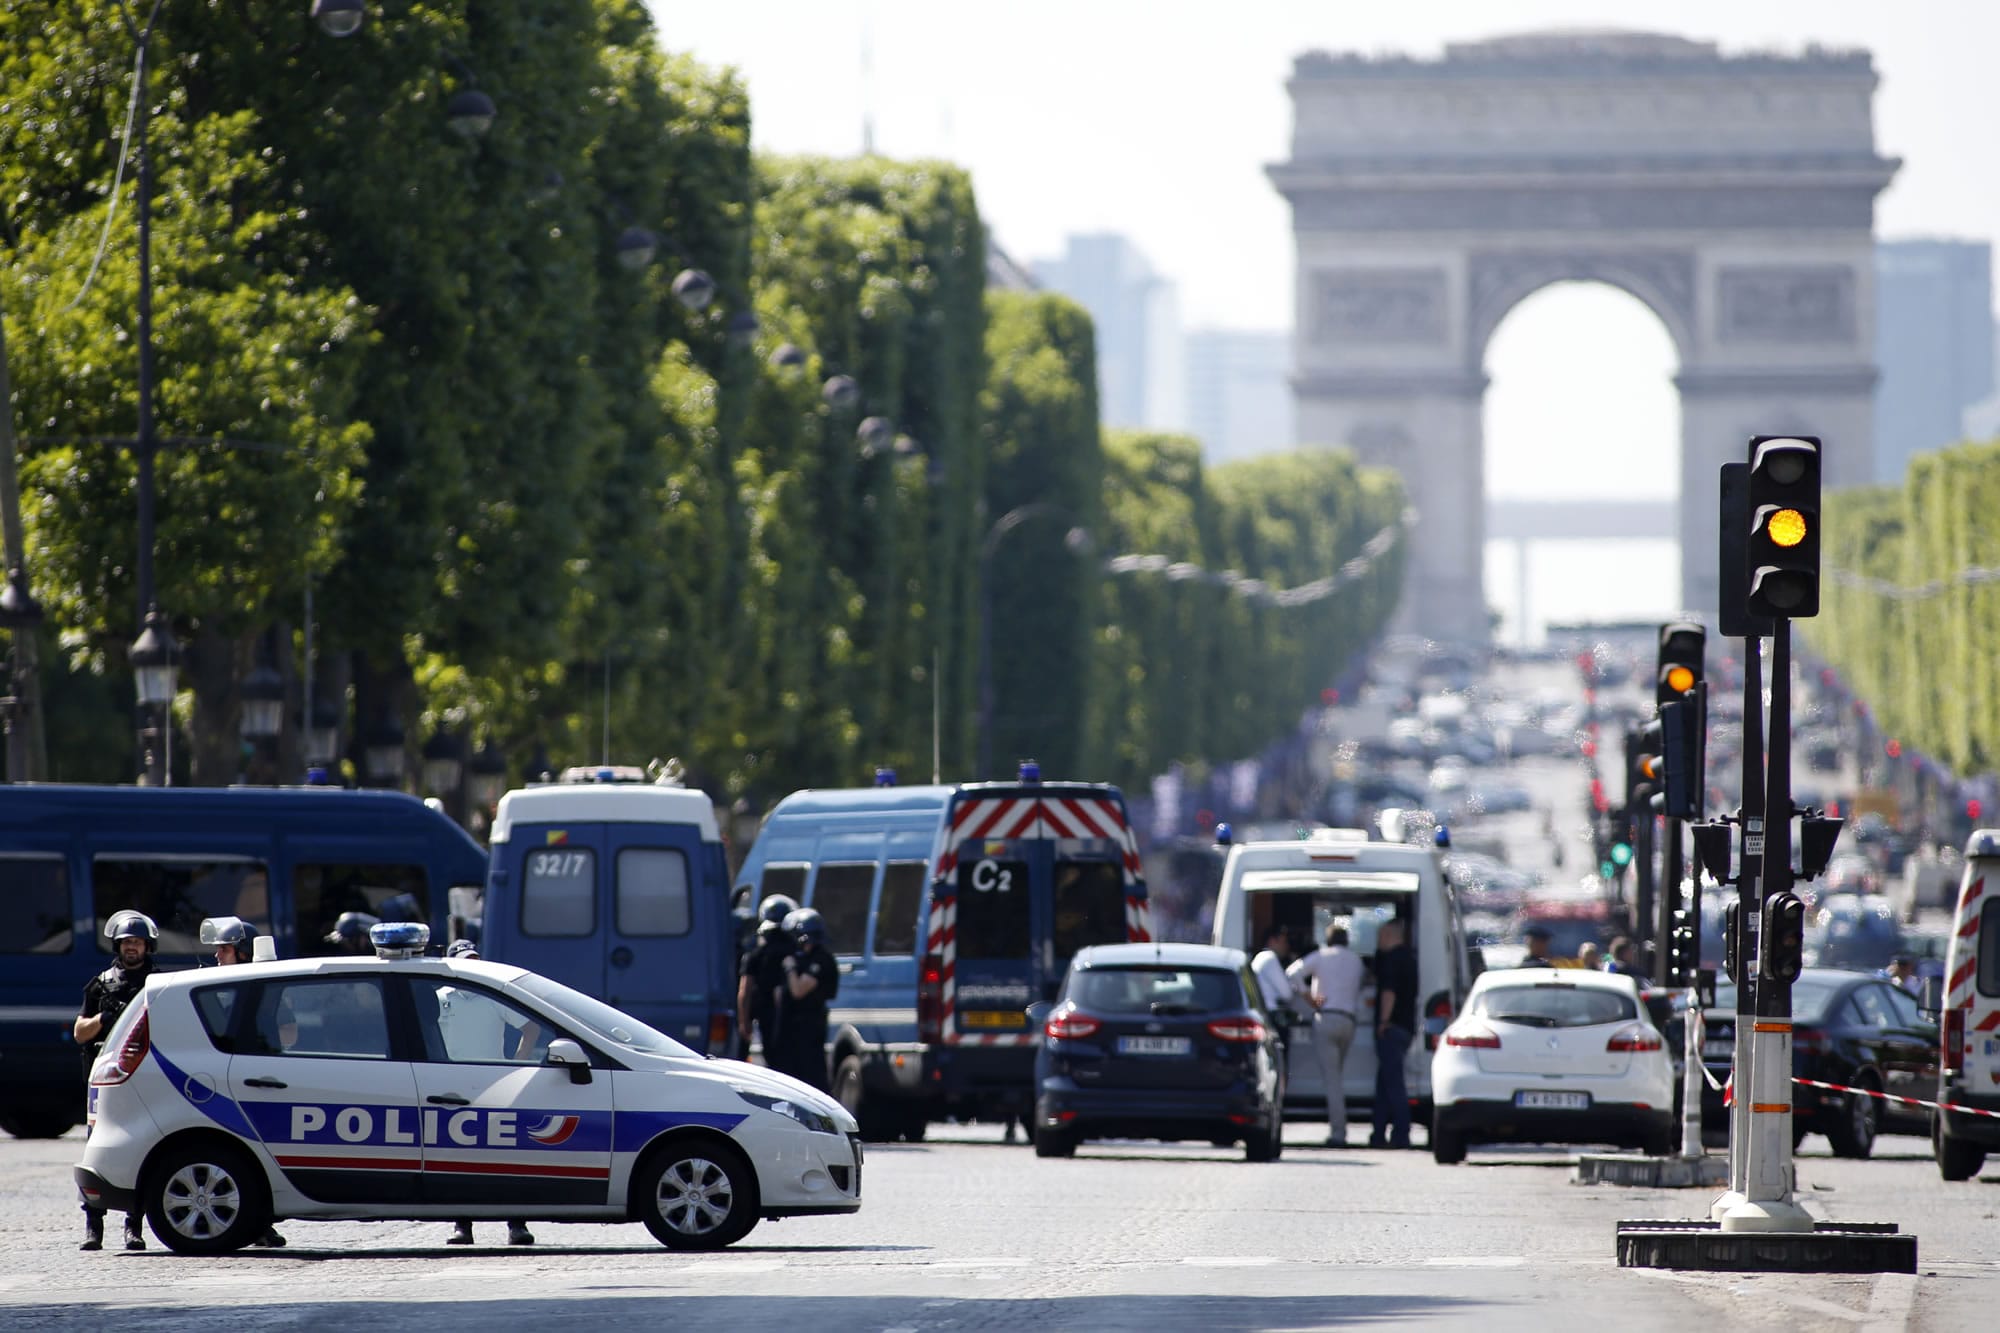 Police forces secure the area on the Champs Elysées in Paris, Monday, June 19, 2017. A driver rammed his car into a police vehicle in the Champs-Elysees shopping district Monday, prompting a fiery explosion, and was likely killed in the incident, authorities said. France's anti-terrorism prosecutor opened an investigation.